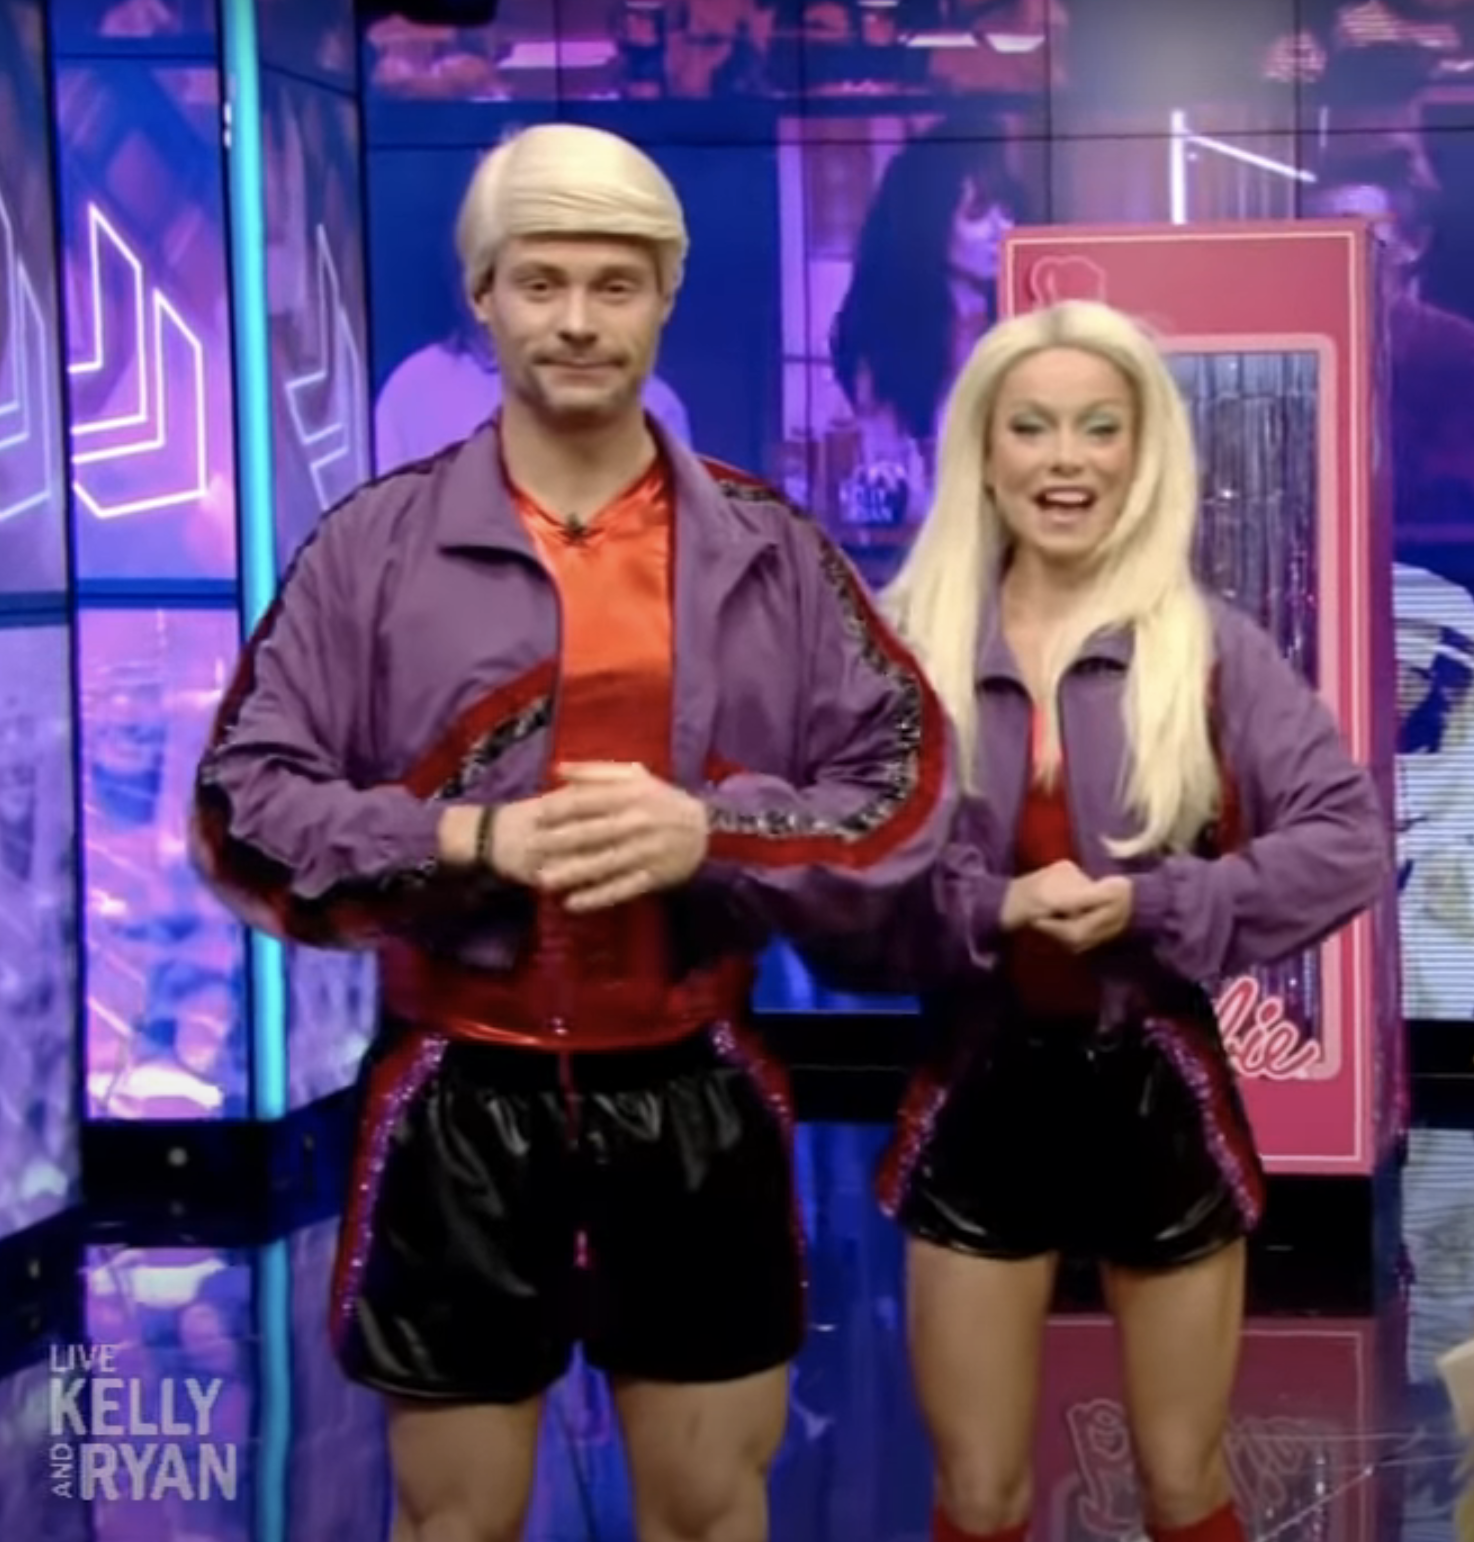 Ryan Seacrest and Kelly Ripa as Ken and Barbie